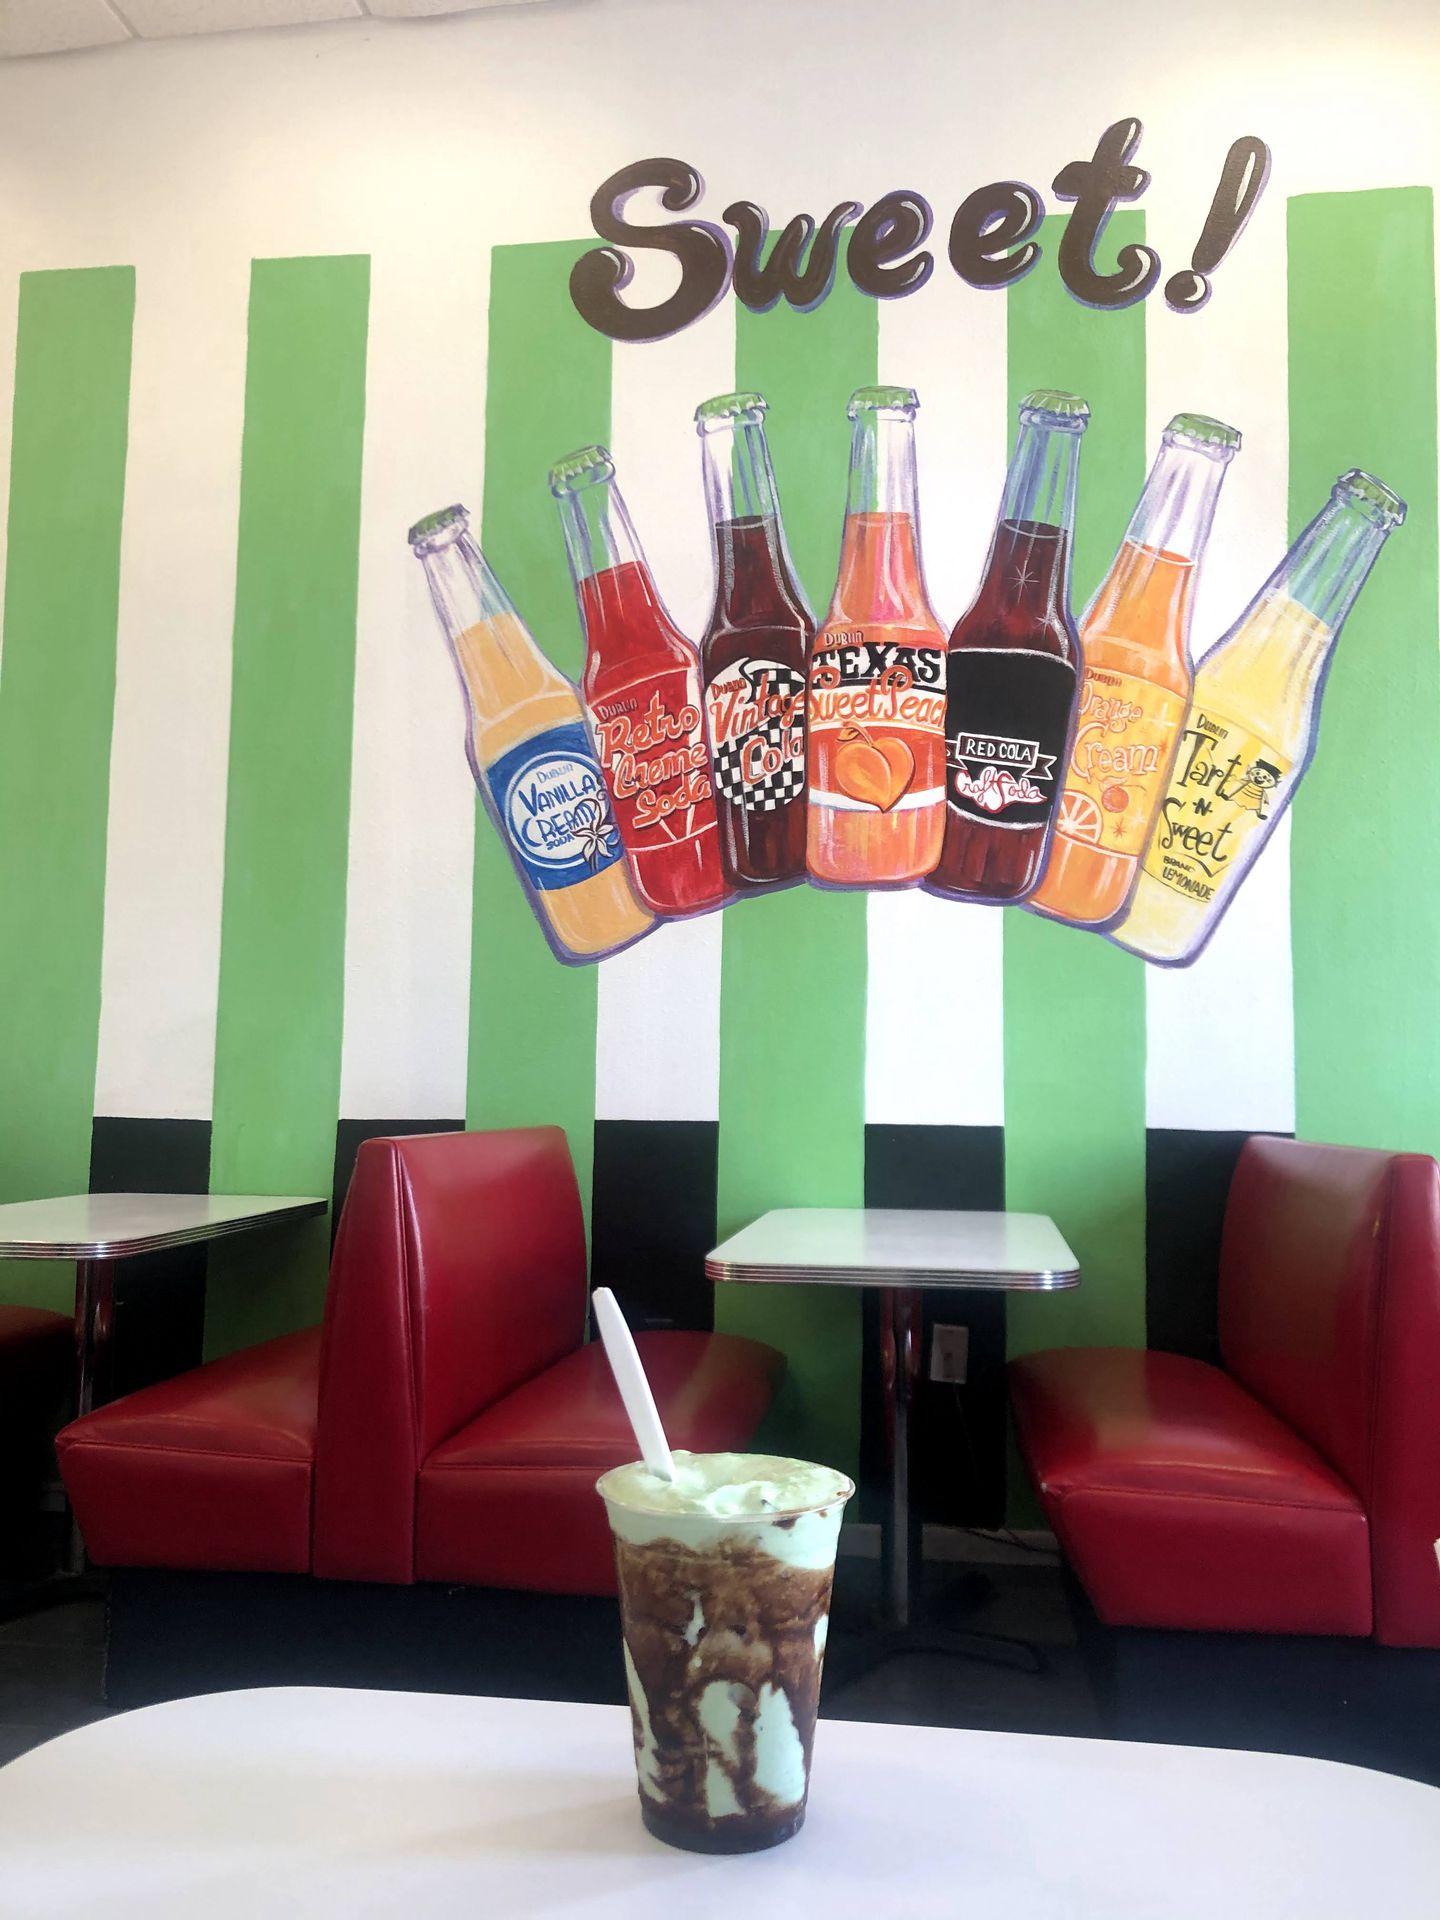 A green shade with chocolate syrup sits on a table in front of a mural that reads "Sweet" with several Dublin Soda bottles painted below it.